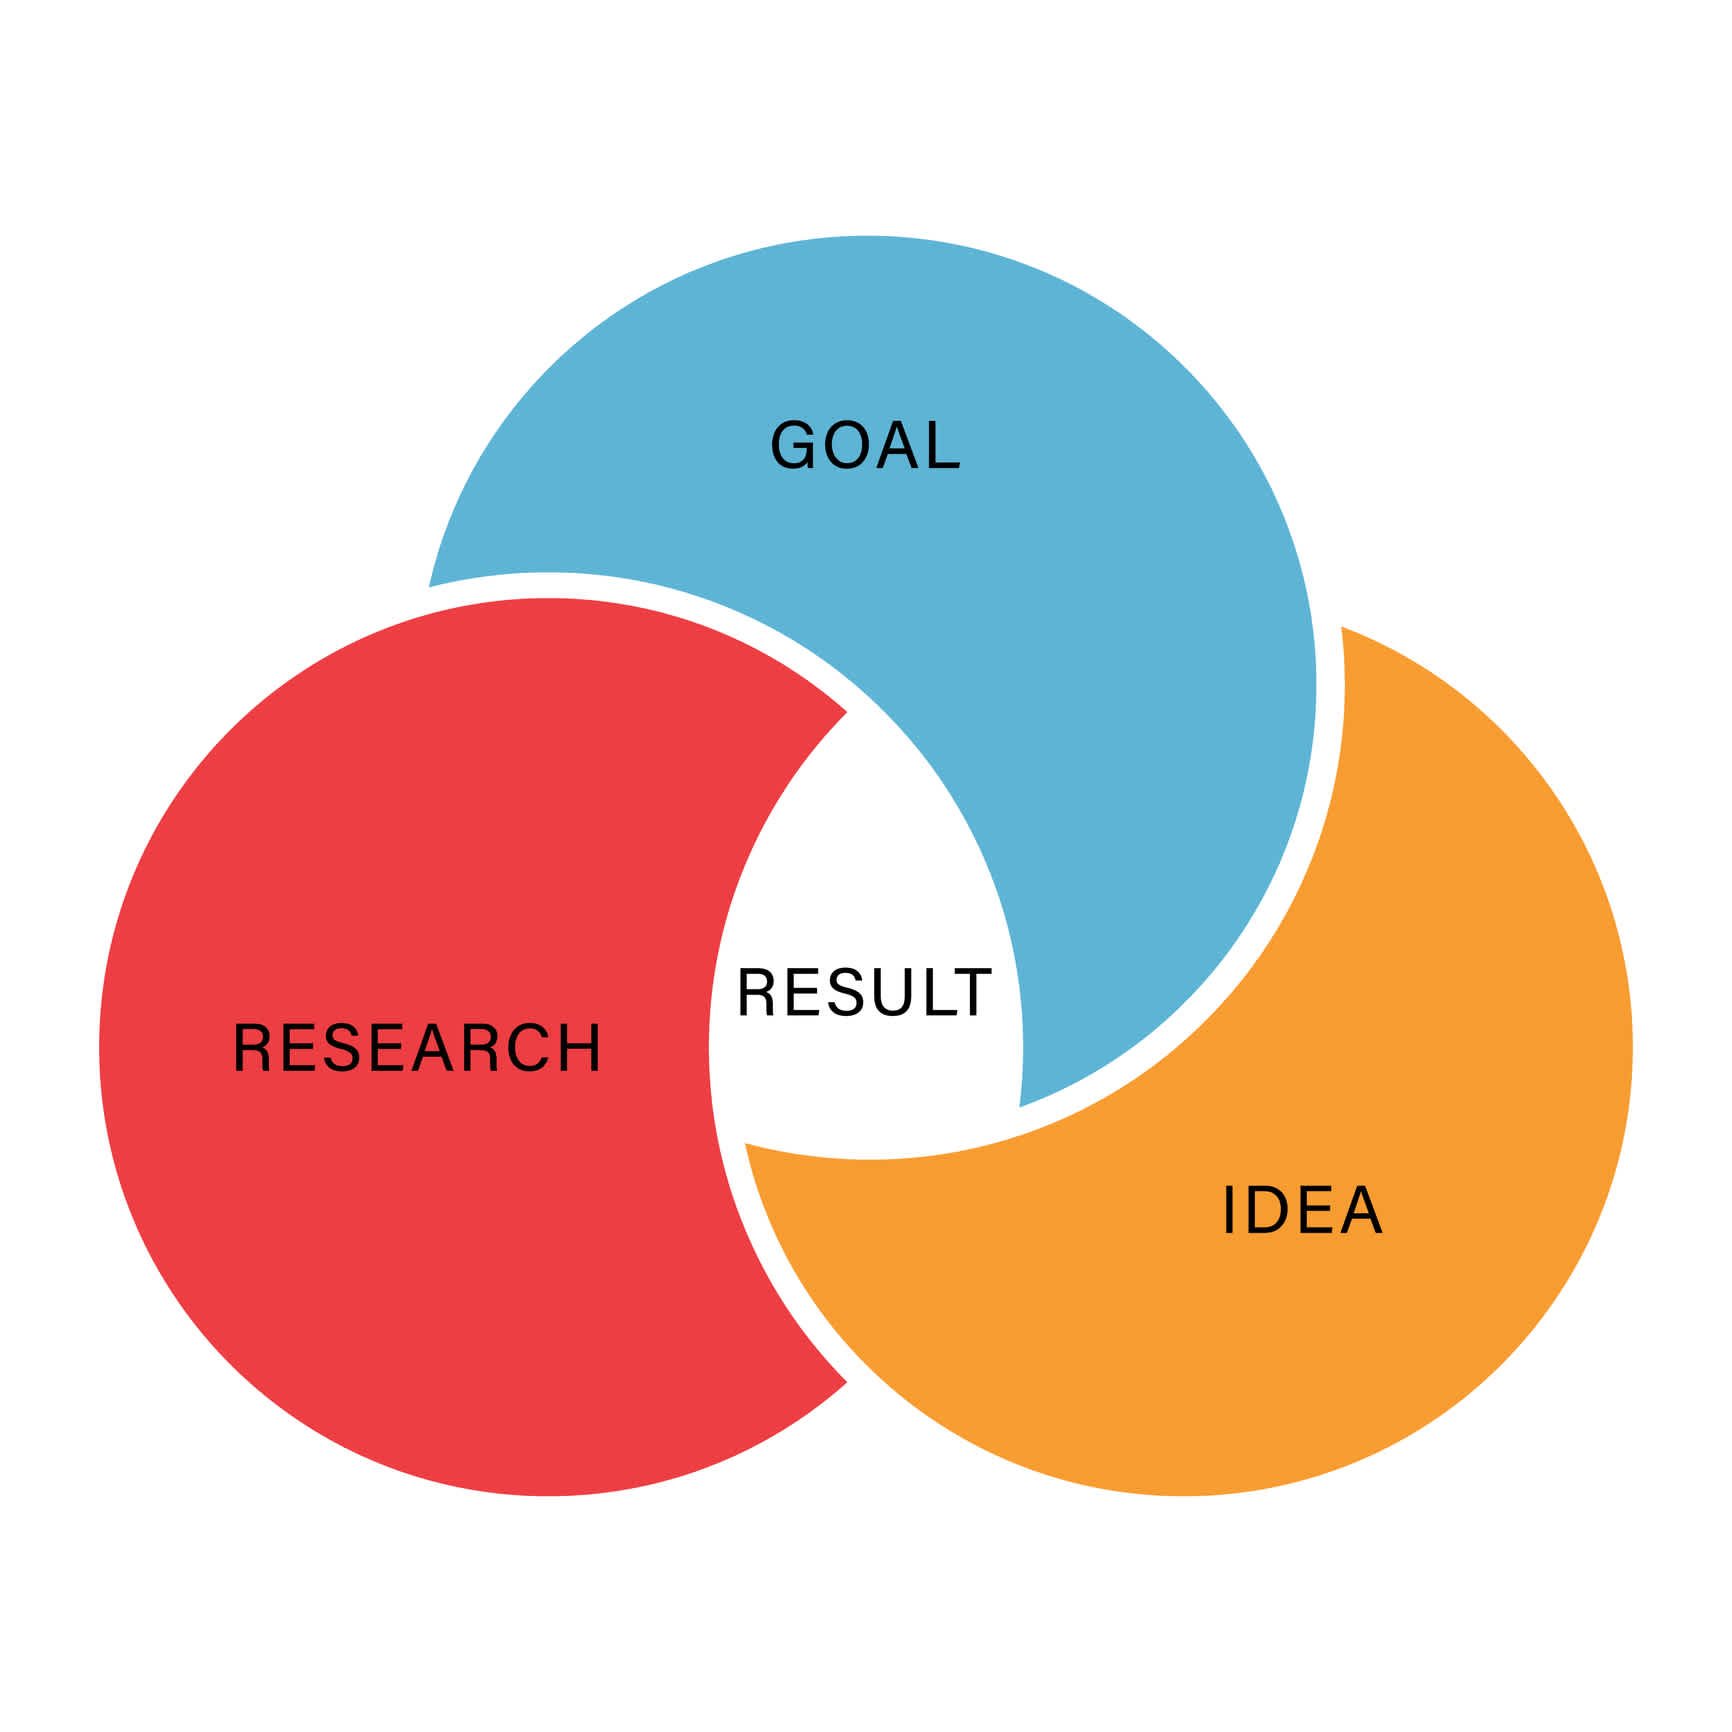 do your research to set goals based on ideas if you want to achieve optimal results.